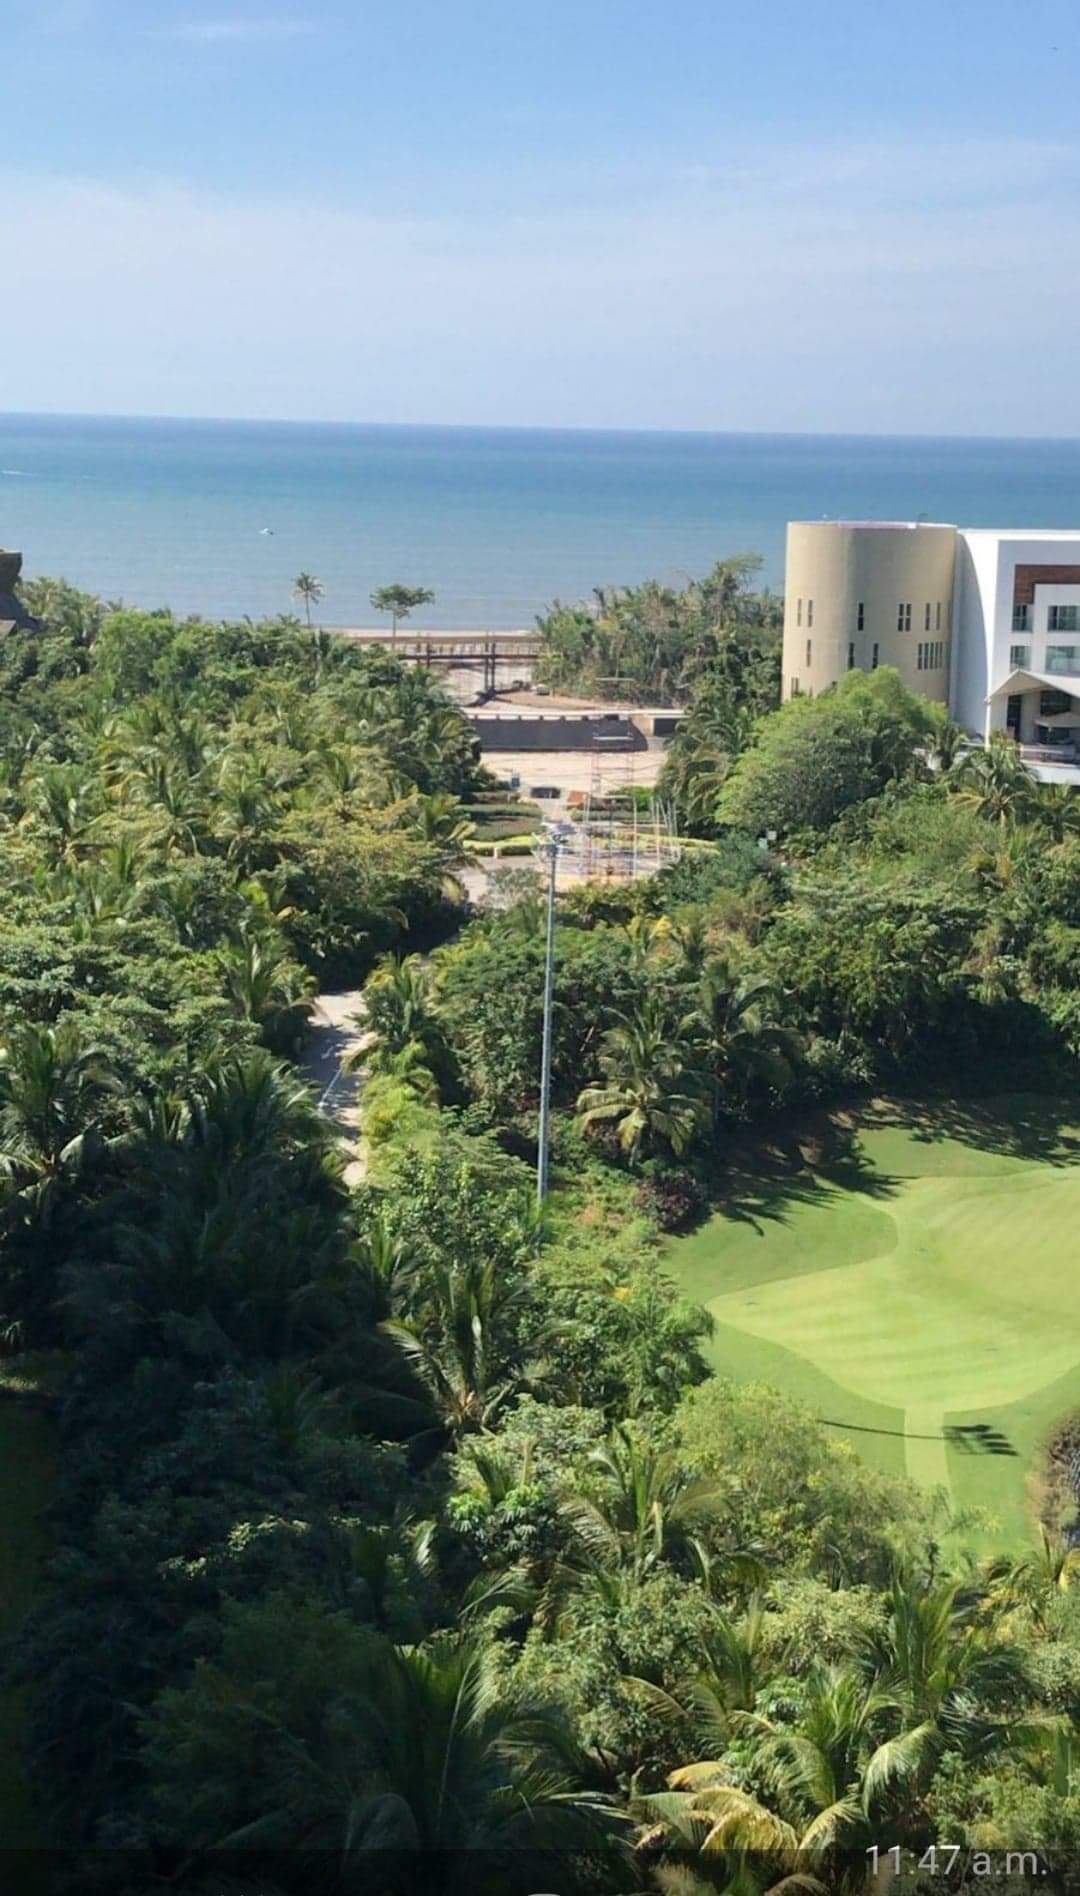 This photo update from Dale in Nuevo Vallarta shows areas of Vidanta Nayarit that are under construction. BeachLand for Estates owners, lagoons, and the Lakes Course...all under repair. Finish one portiong by January 30, 2020? Stay tuned... - Subscribers View - 11/15/20